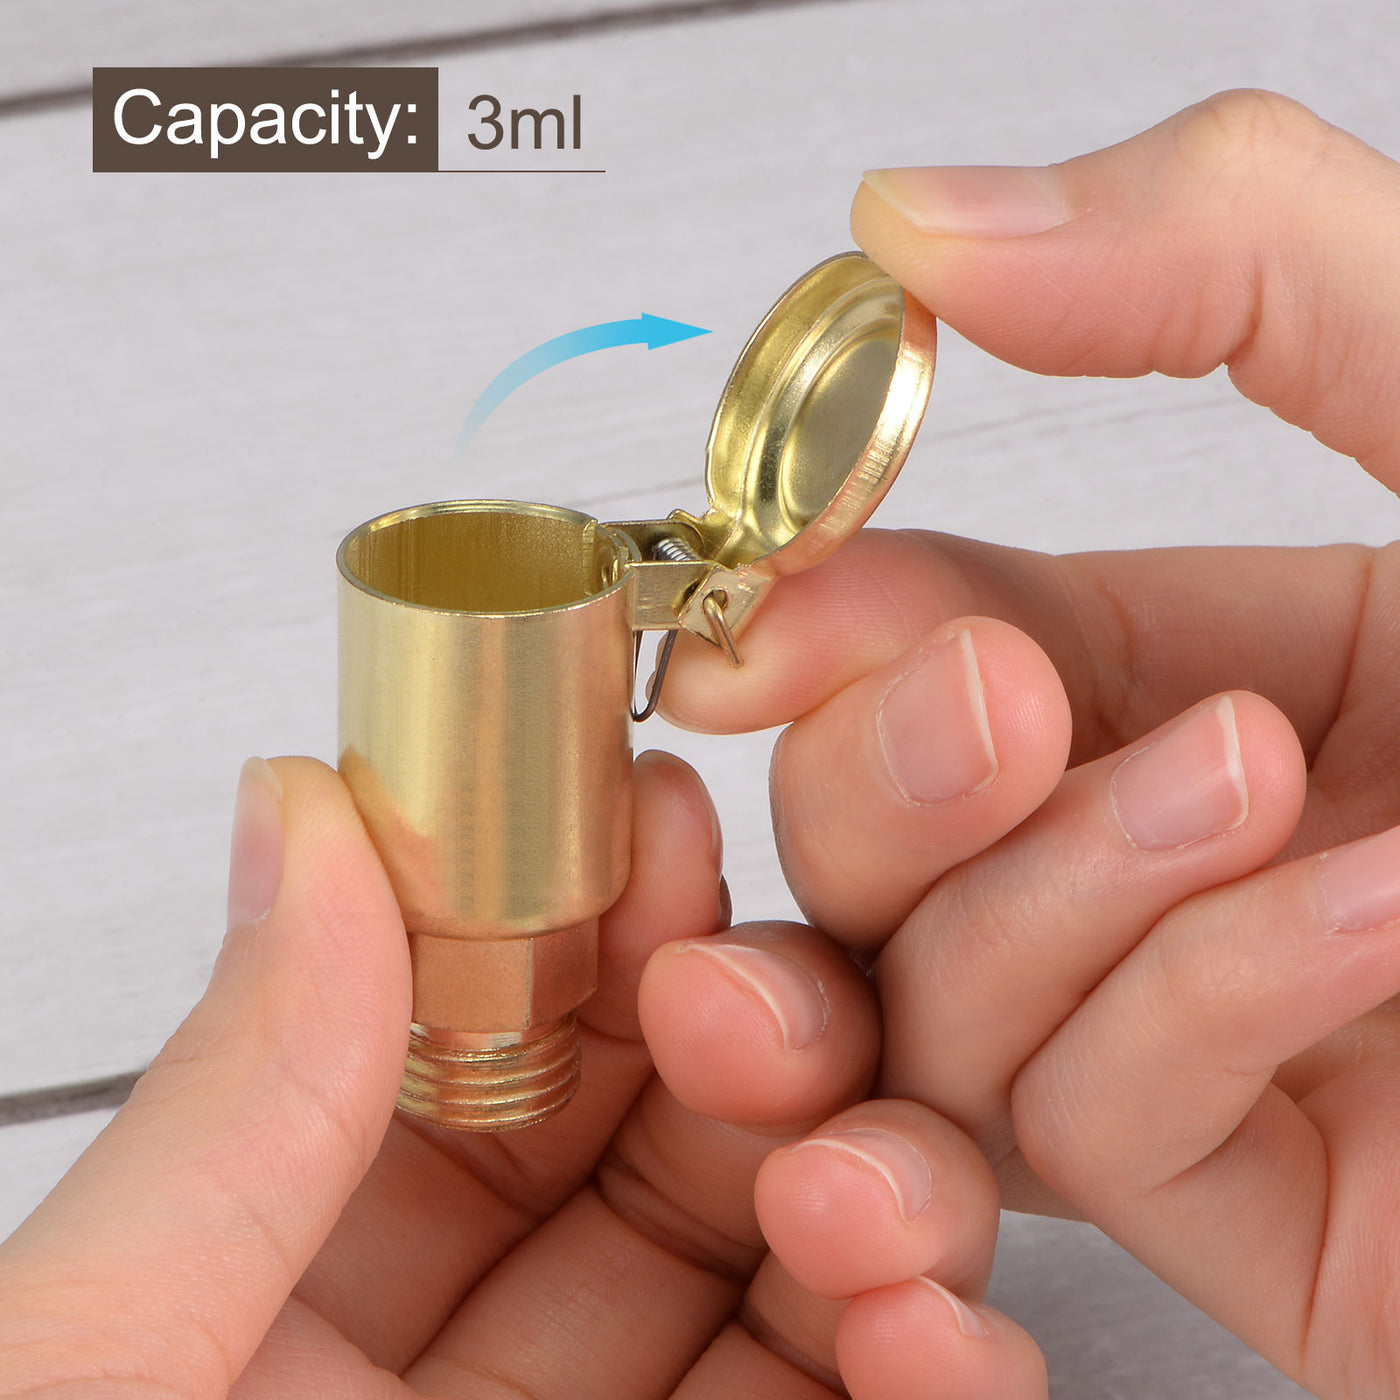 Uxcell Uxcell Spring Grease Oil Cup Cap M14x1.5 Male Thread 3ml Copper Plating Machine Parts 2Pcs